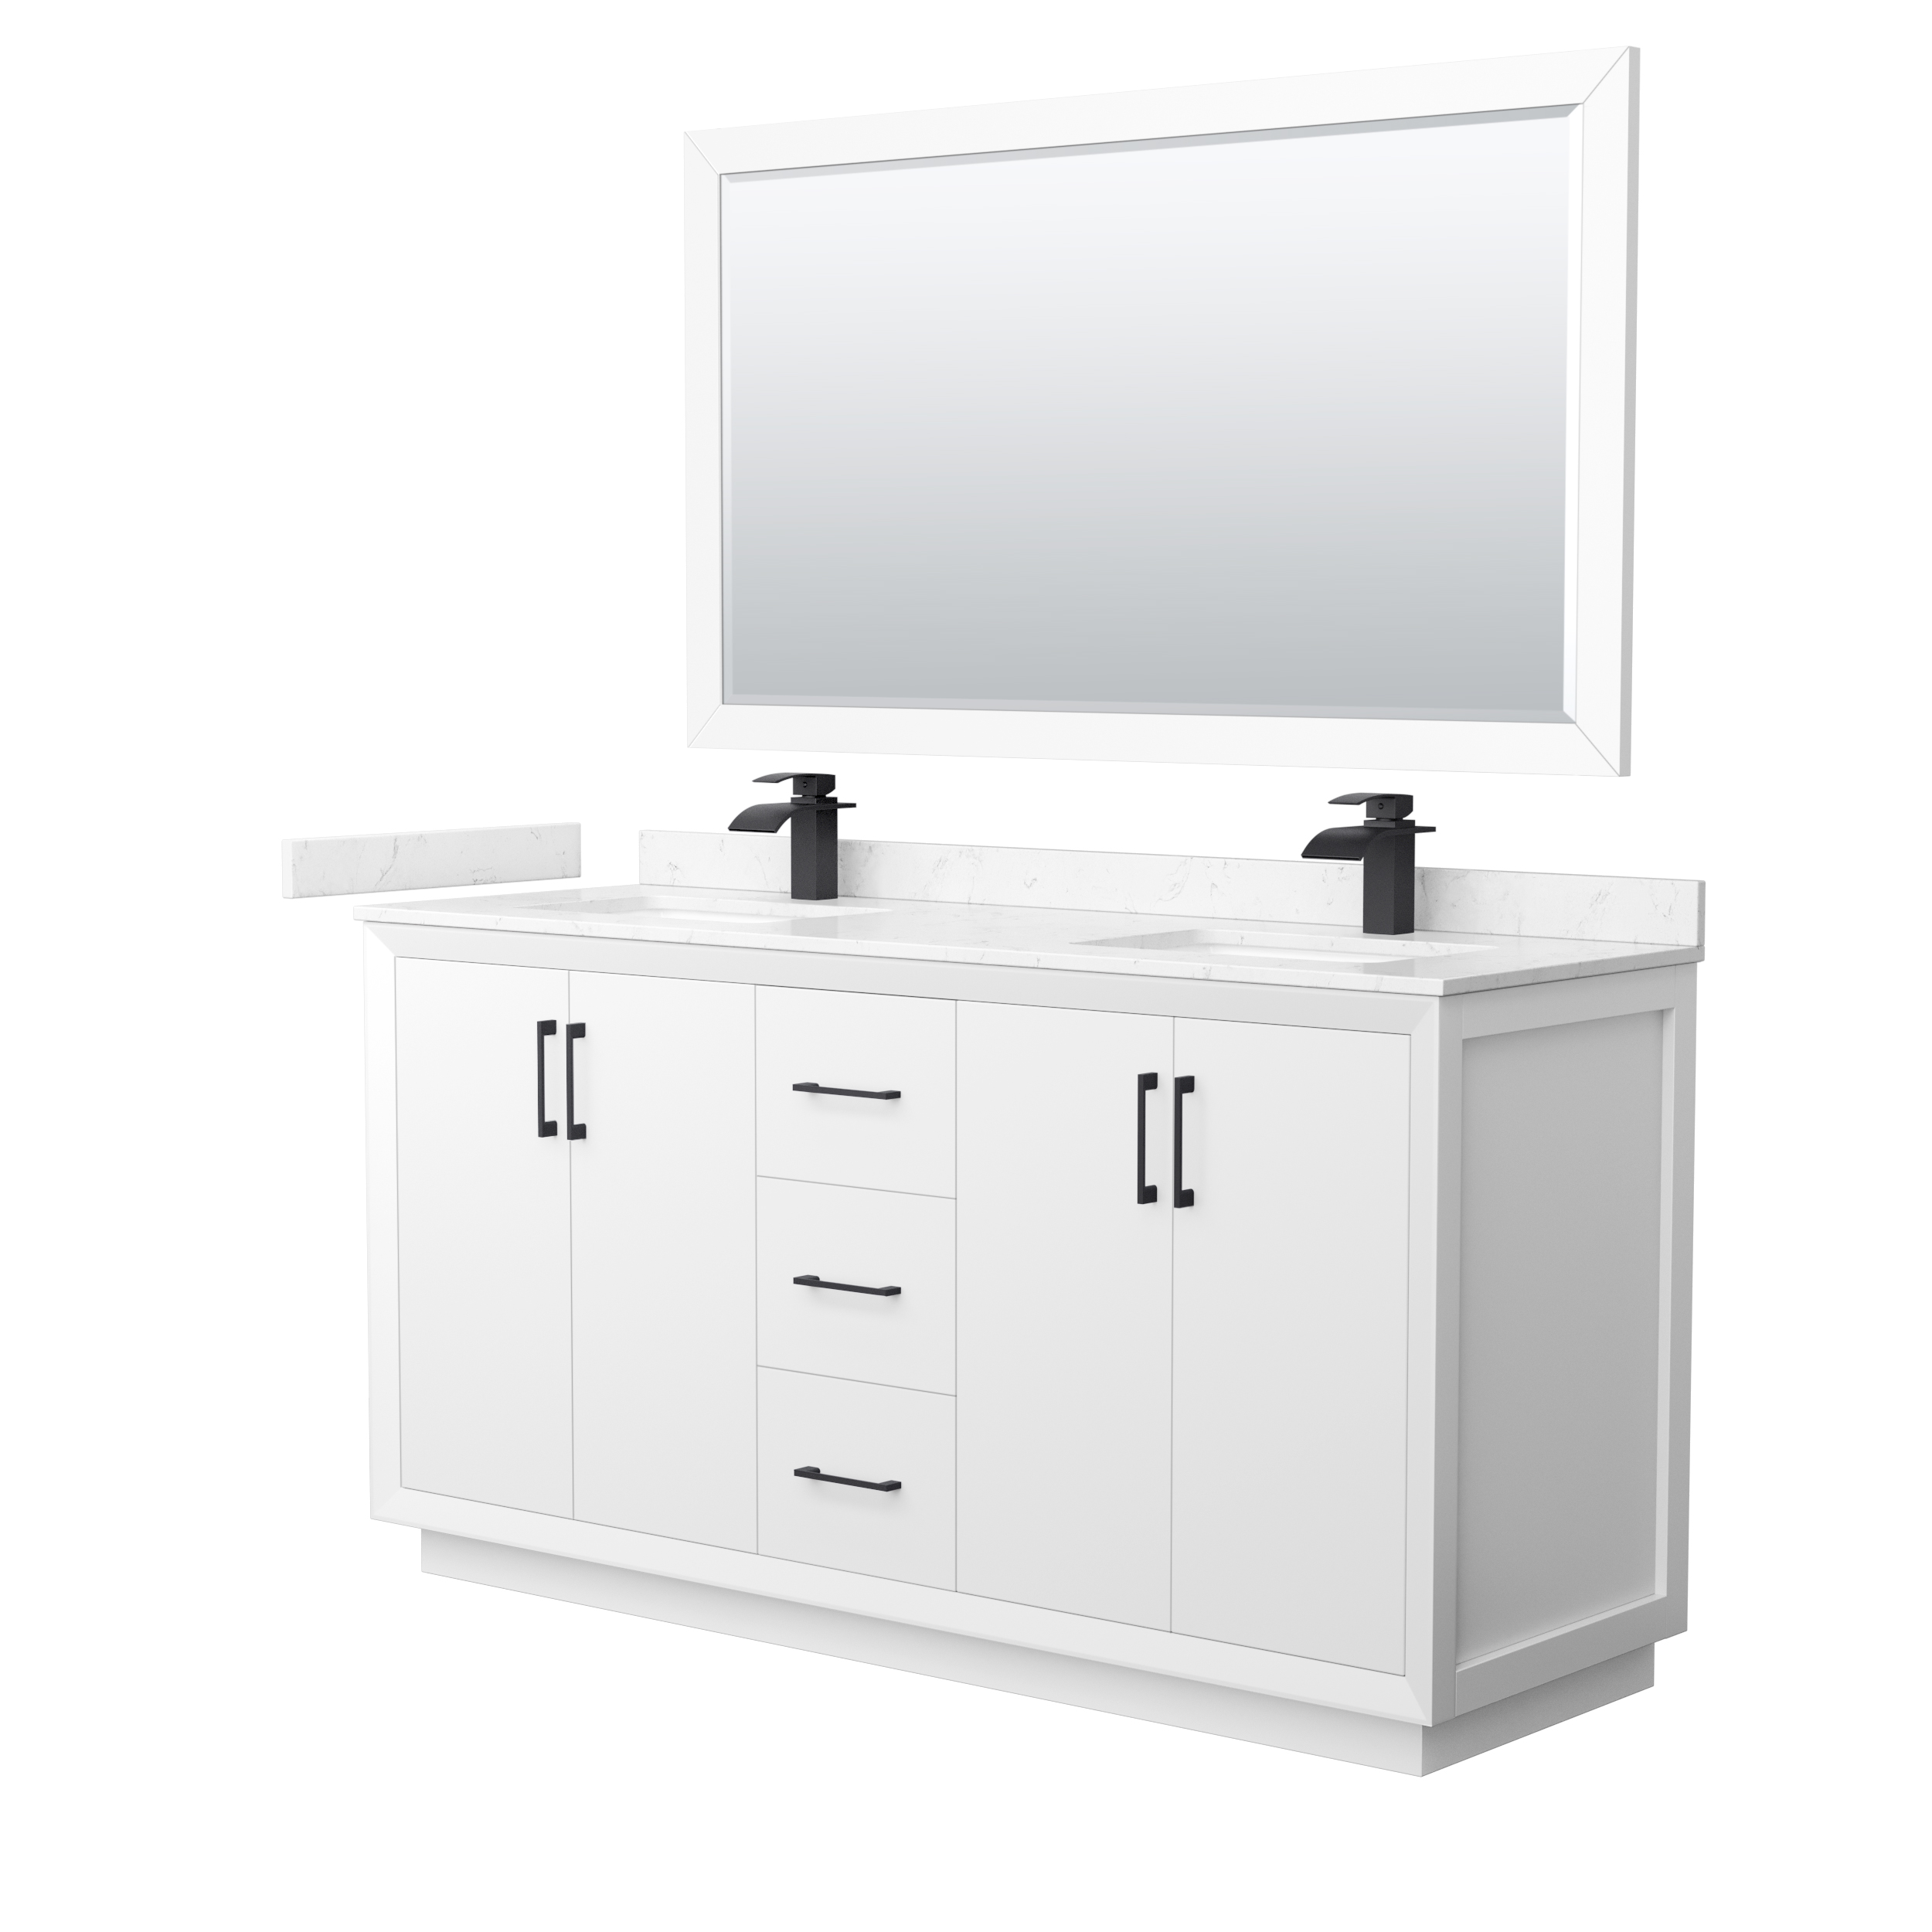 Strada 66" Double Vanity with optional Cultured Marble Counter - White WC-4141-66-DBL-VAN-WHT-